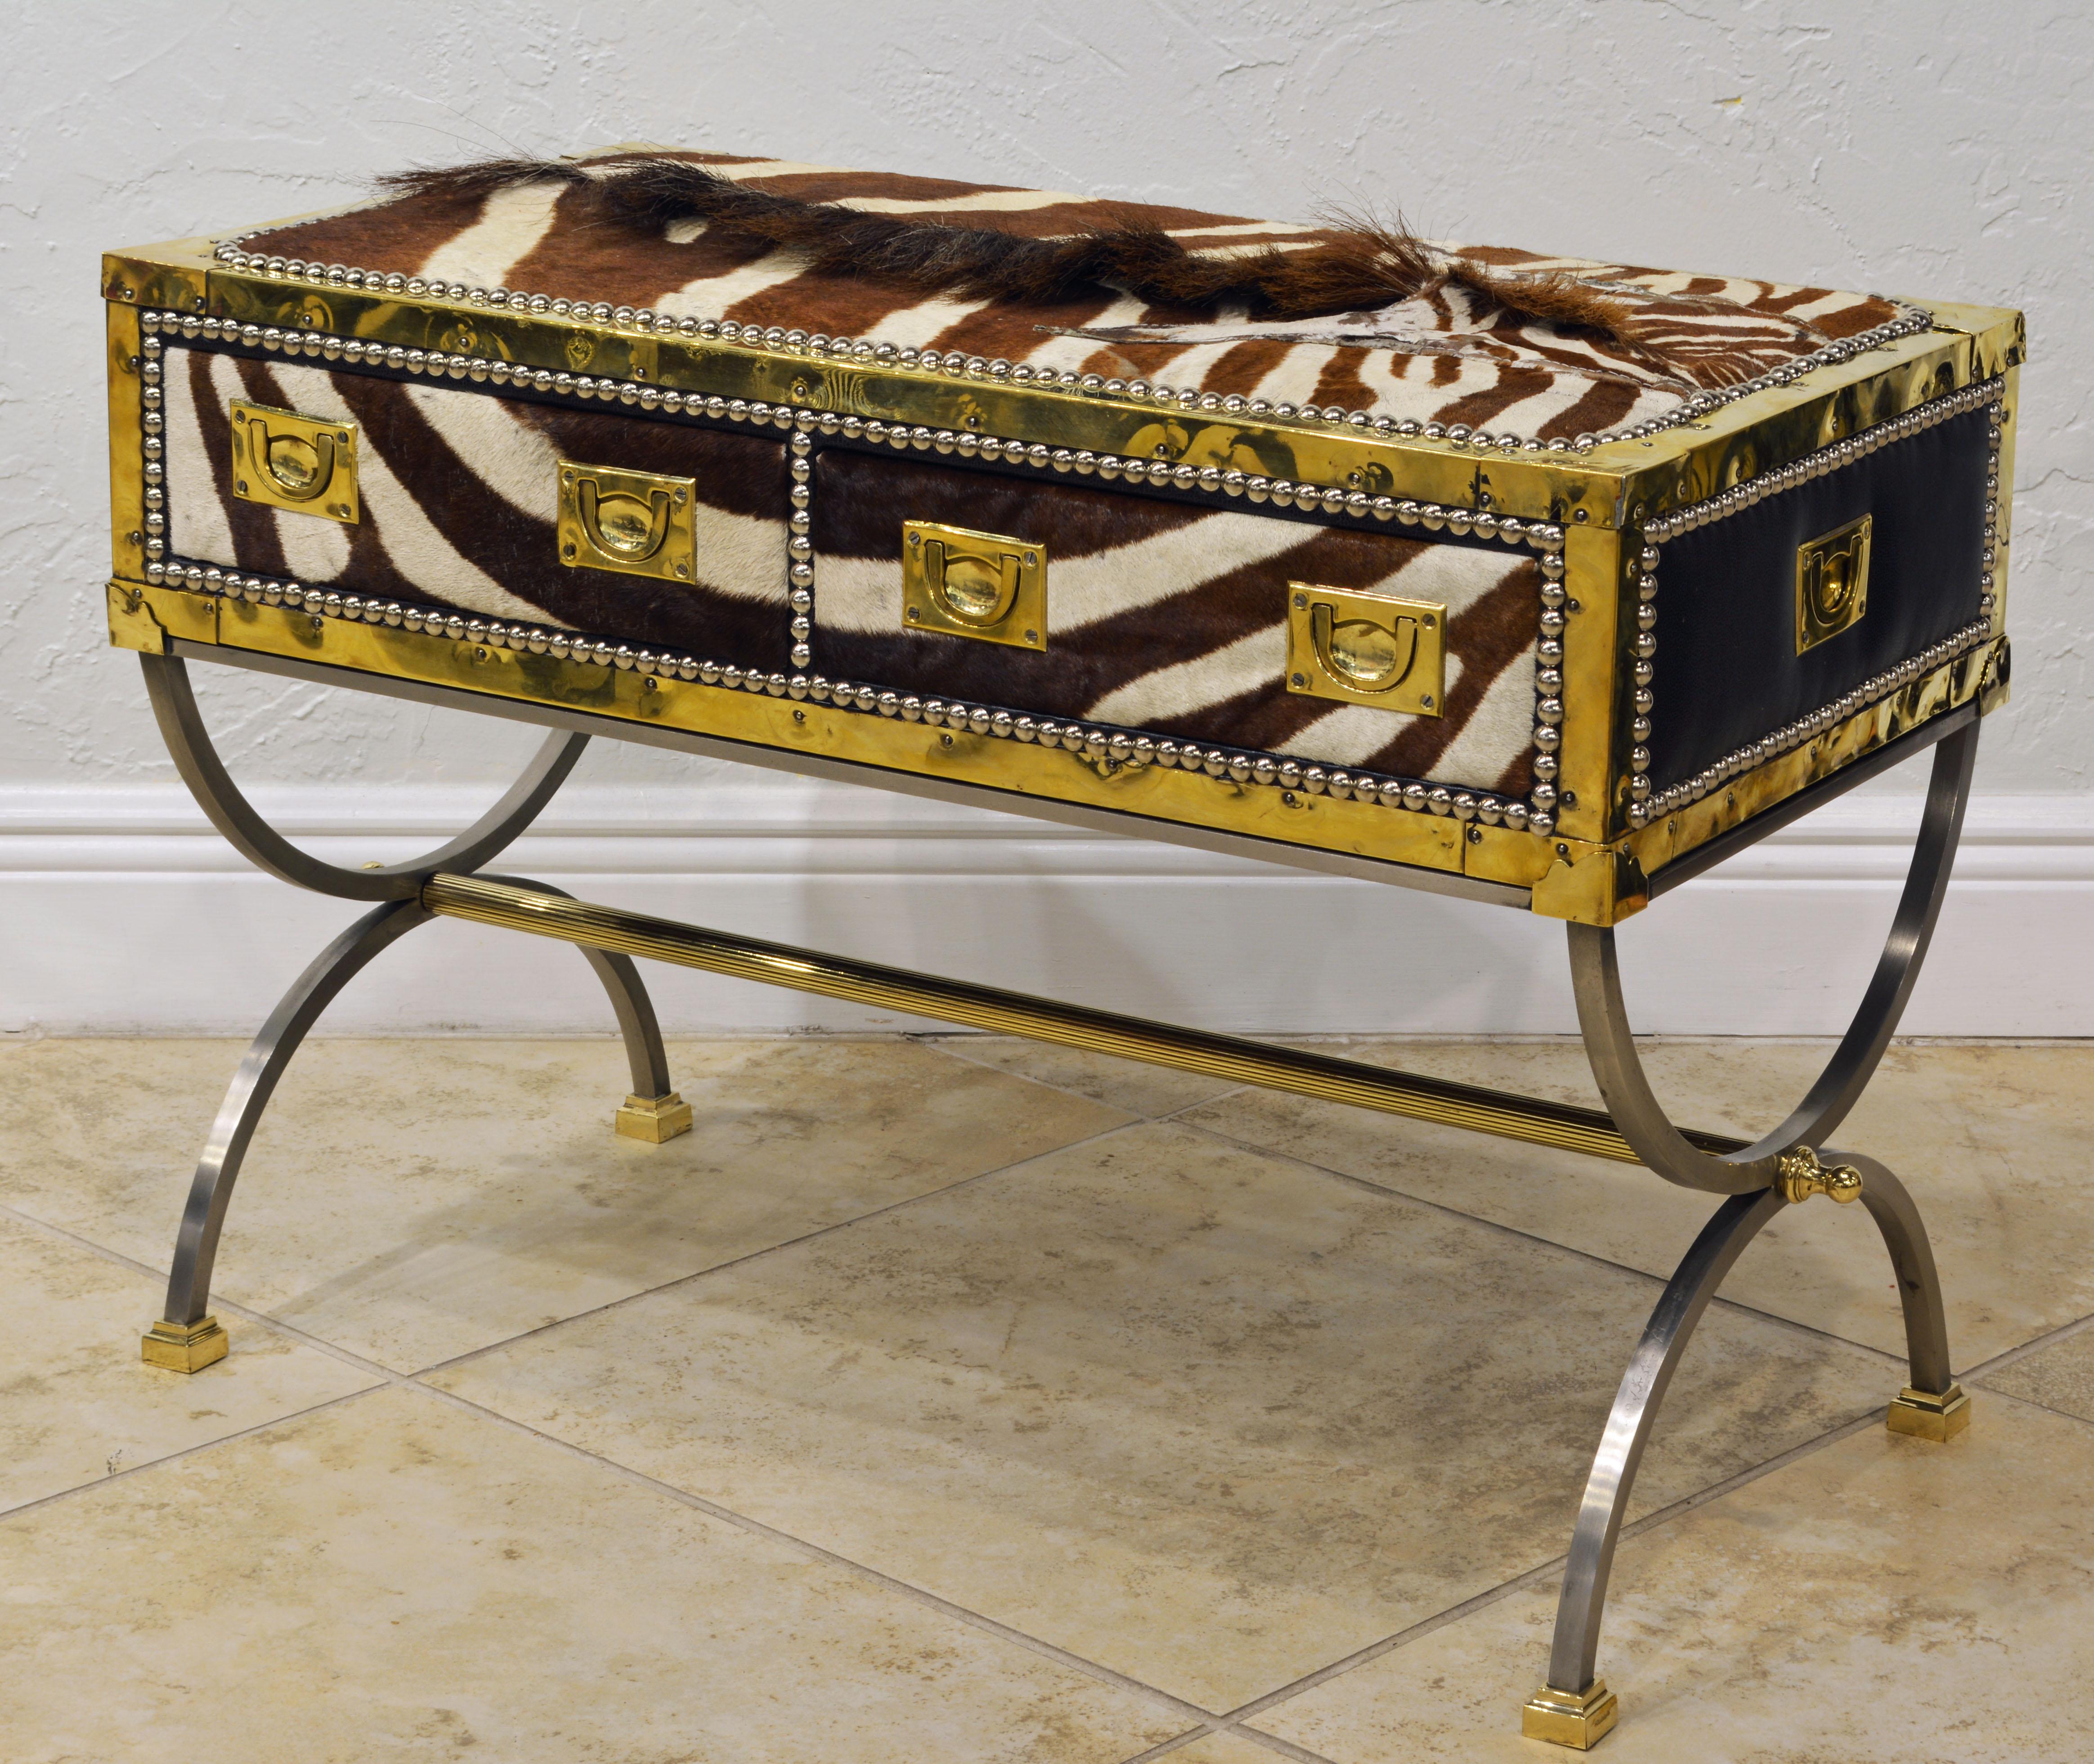 This eye-catching commode features a two-drawer brass edged campaign style box or trunk covered with zebra skin on the front and top and with black leather on back and sides accented by steel nail head trim. It rests on a curule style finely